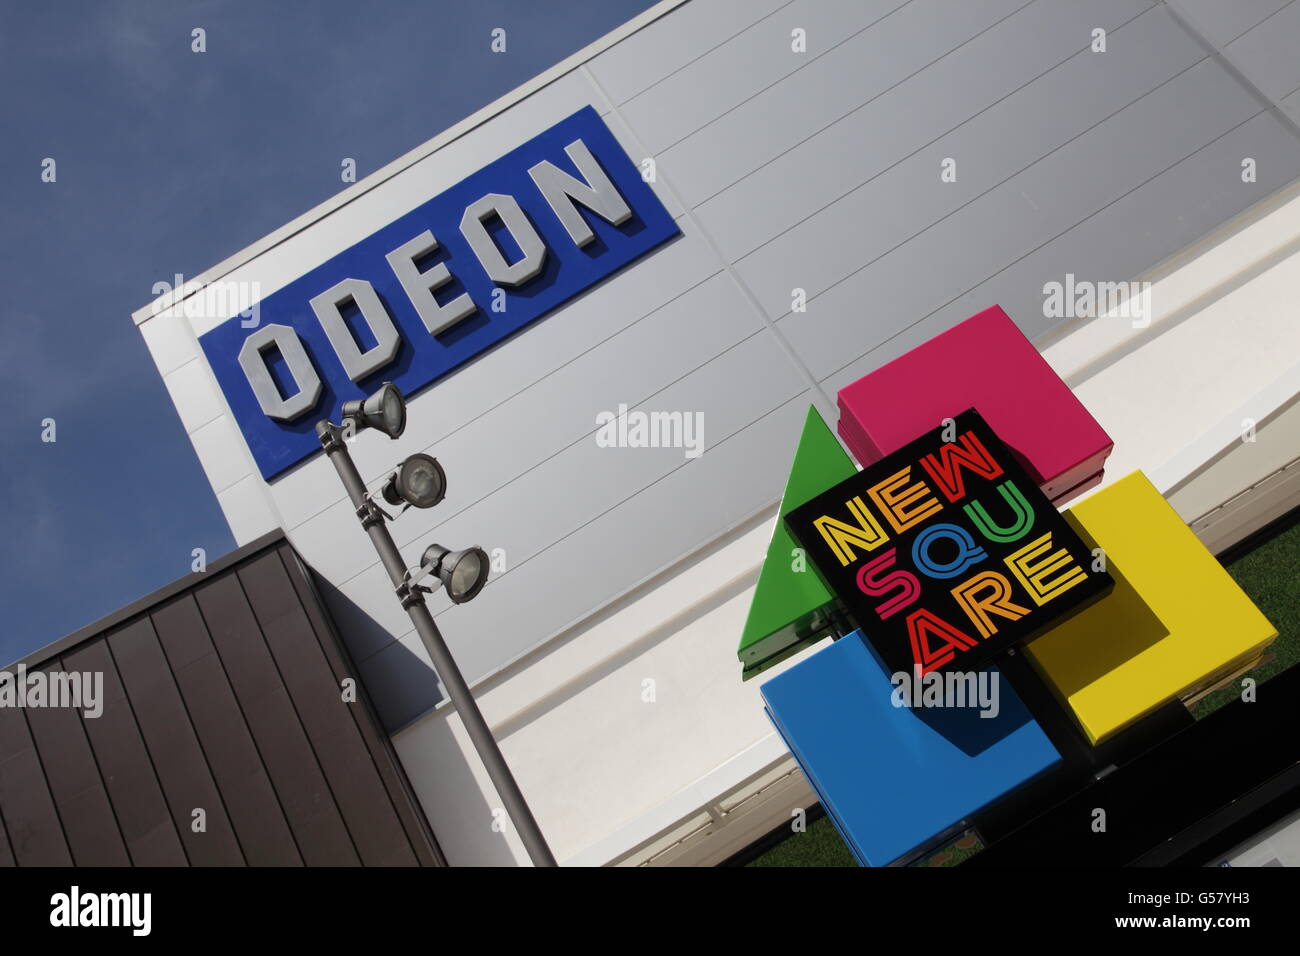 The Odeon Cinema in New Square shopping centre, West Bromwich, Stock Photo